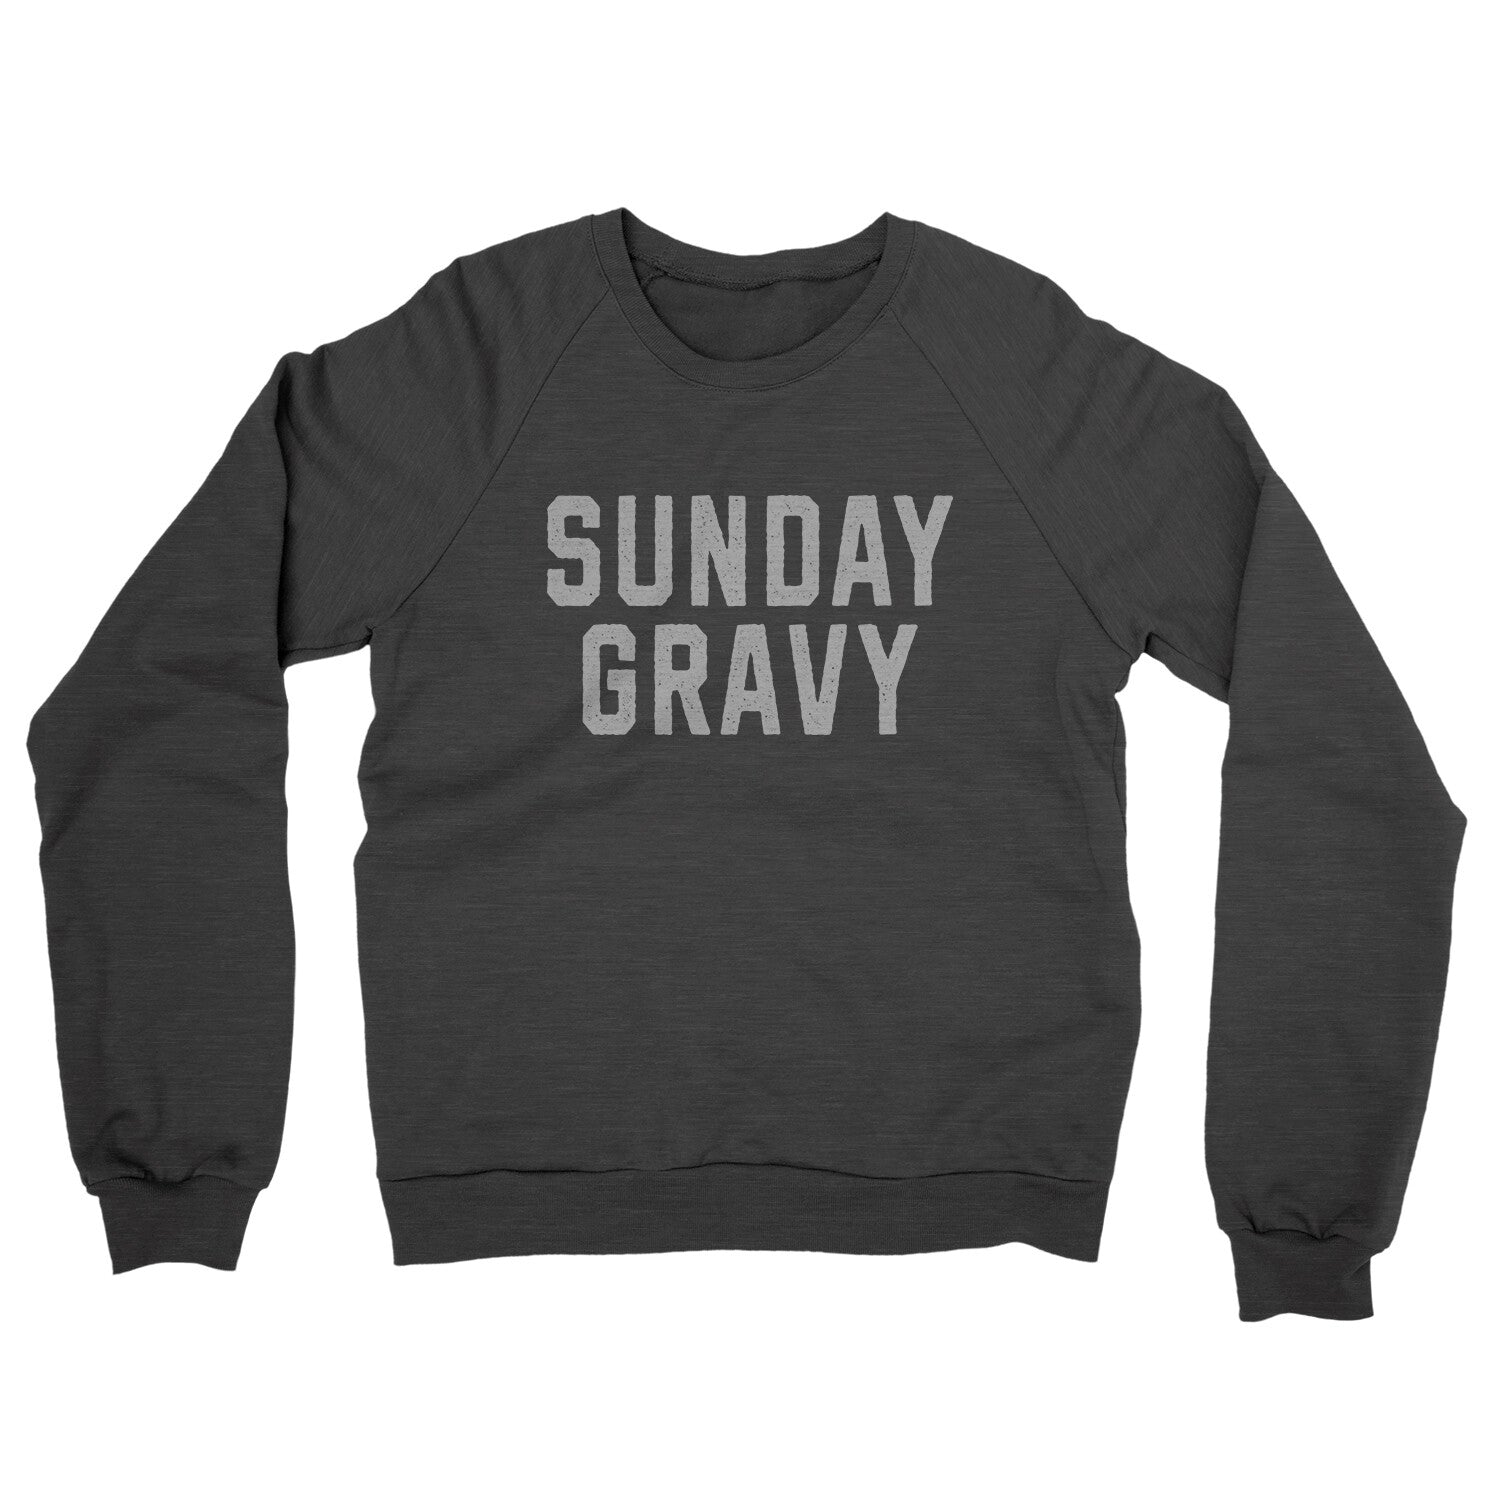 Sunday Gravy in Charcoal Heather Color